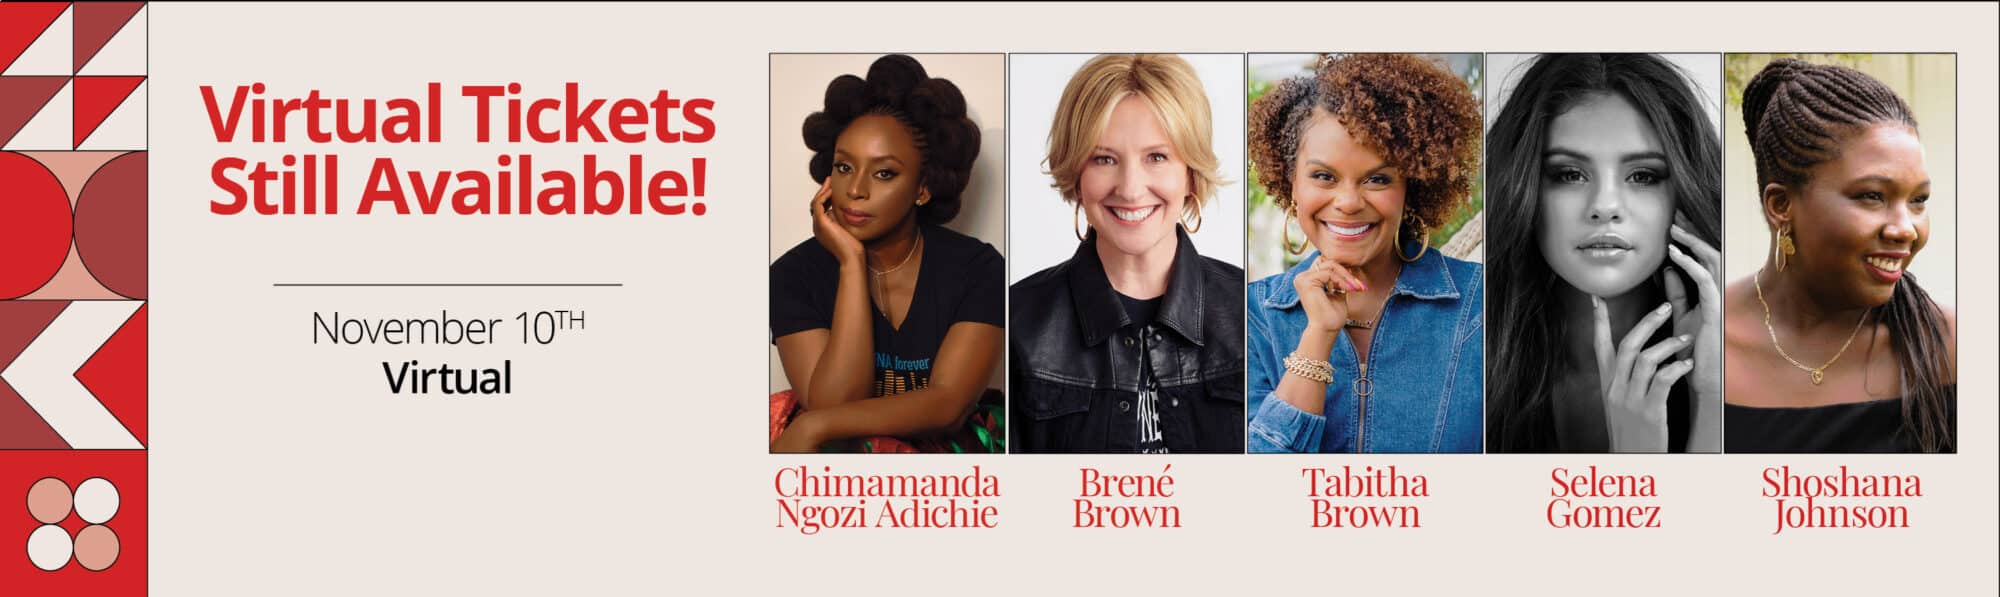 Virtual Conference tickets are still available featuring Chimamanda Adichie, Brené Brown, Tabitha Brown, Selena Gomez, and Shoshana Johnson